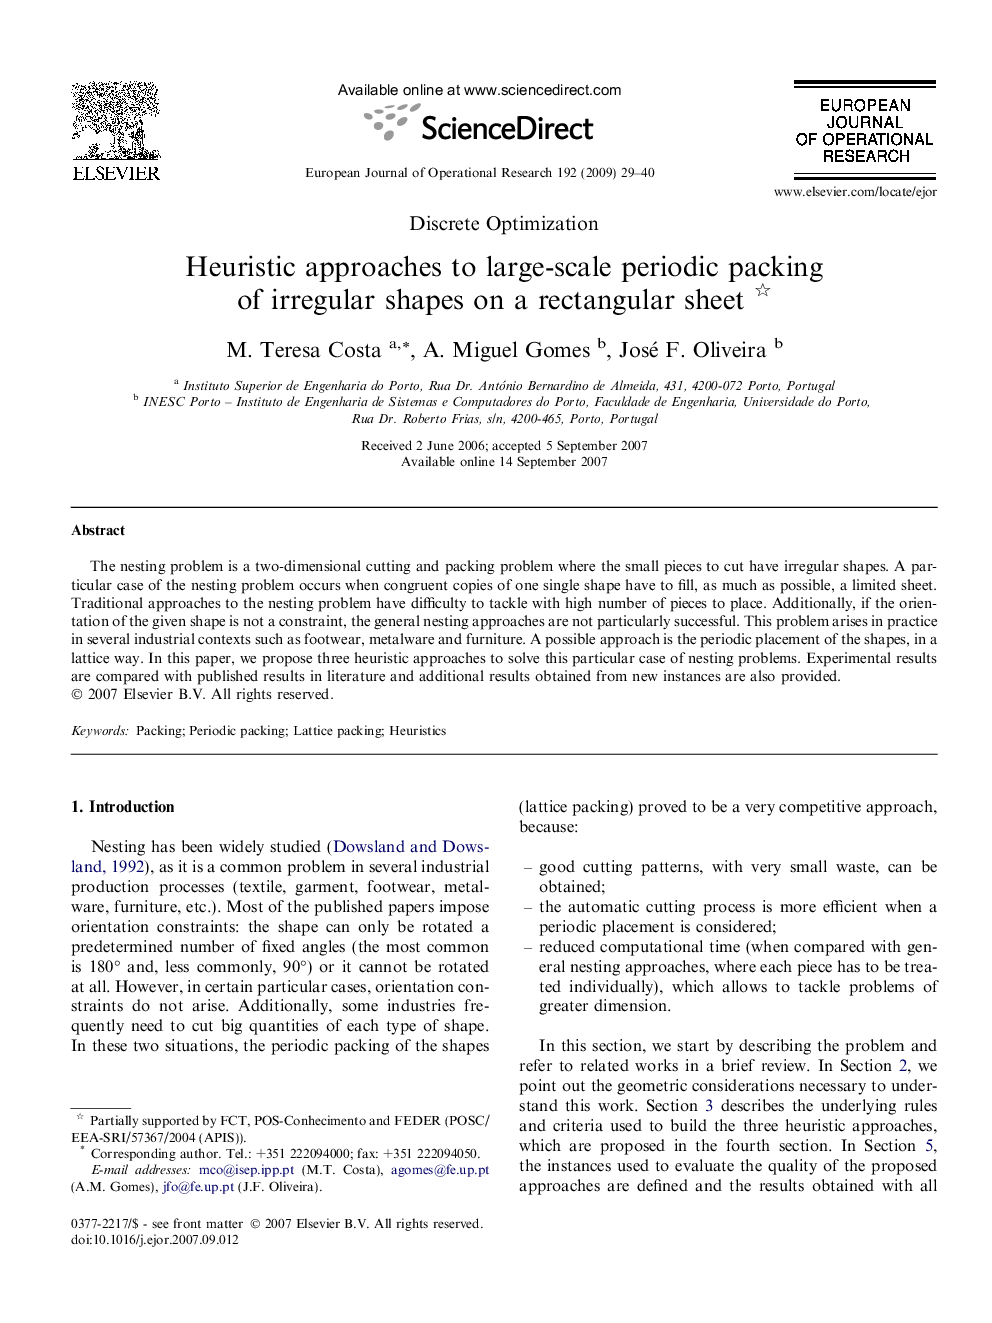 Heuristic approaches to large-scale periodic packing of irregular shapes on a rectangular sheet 